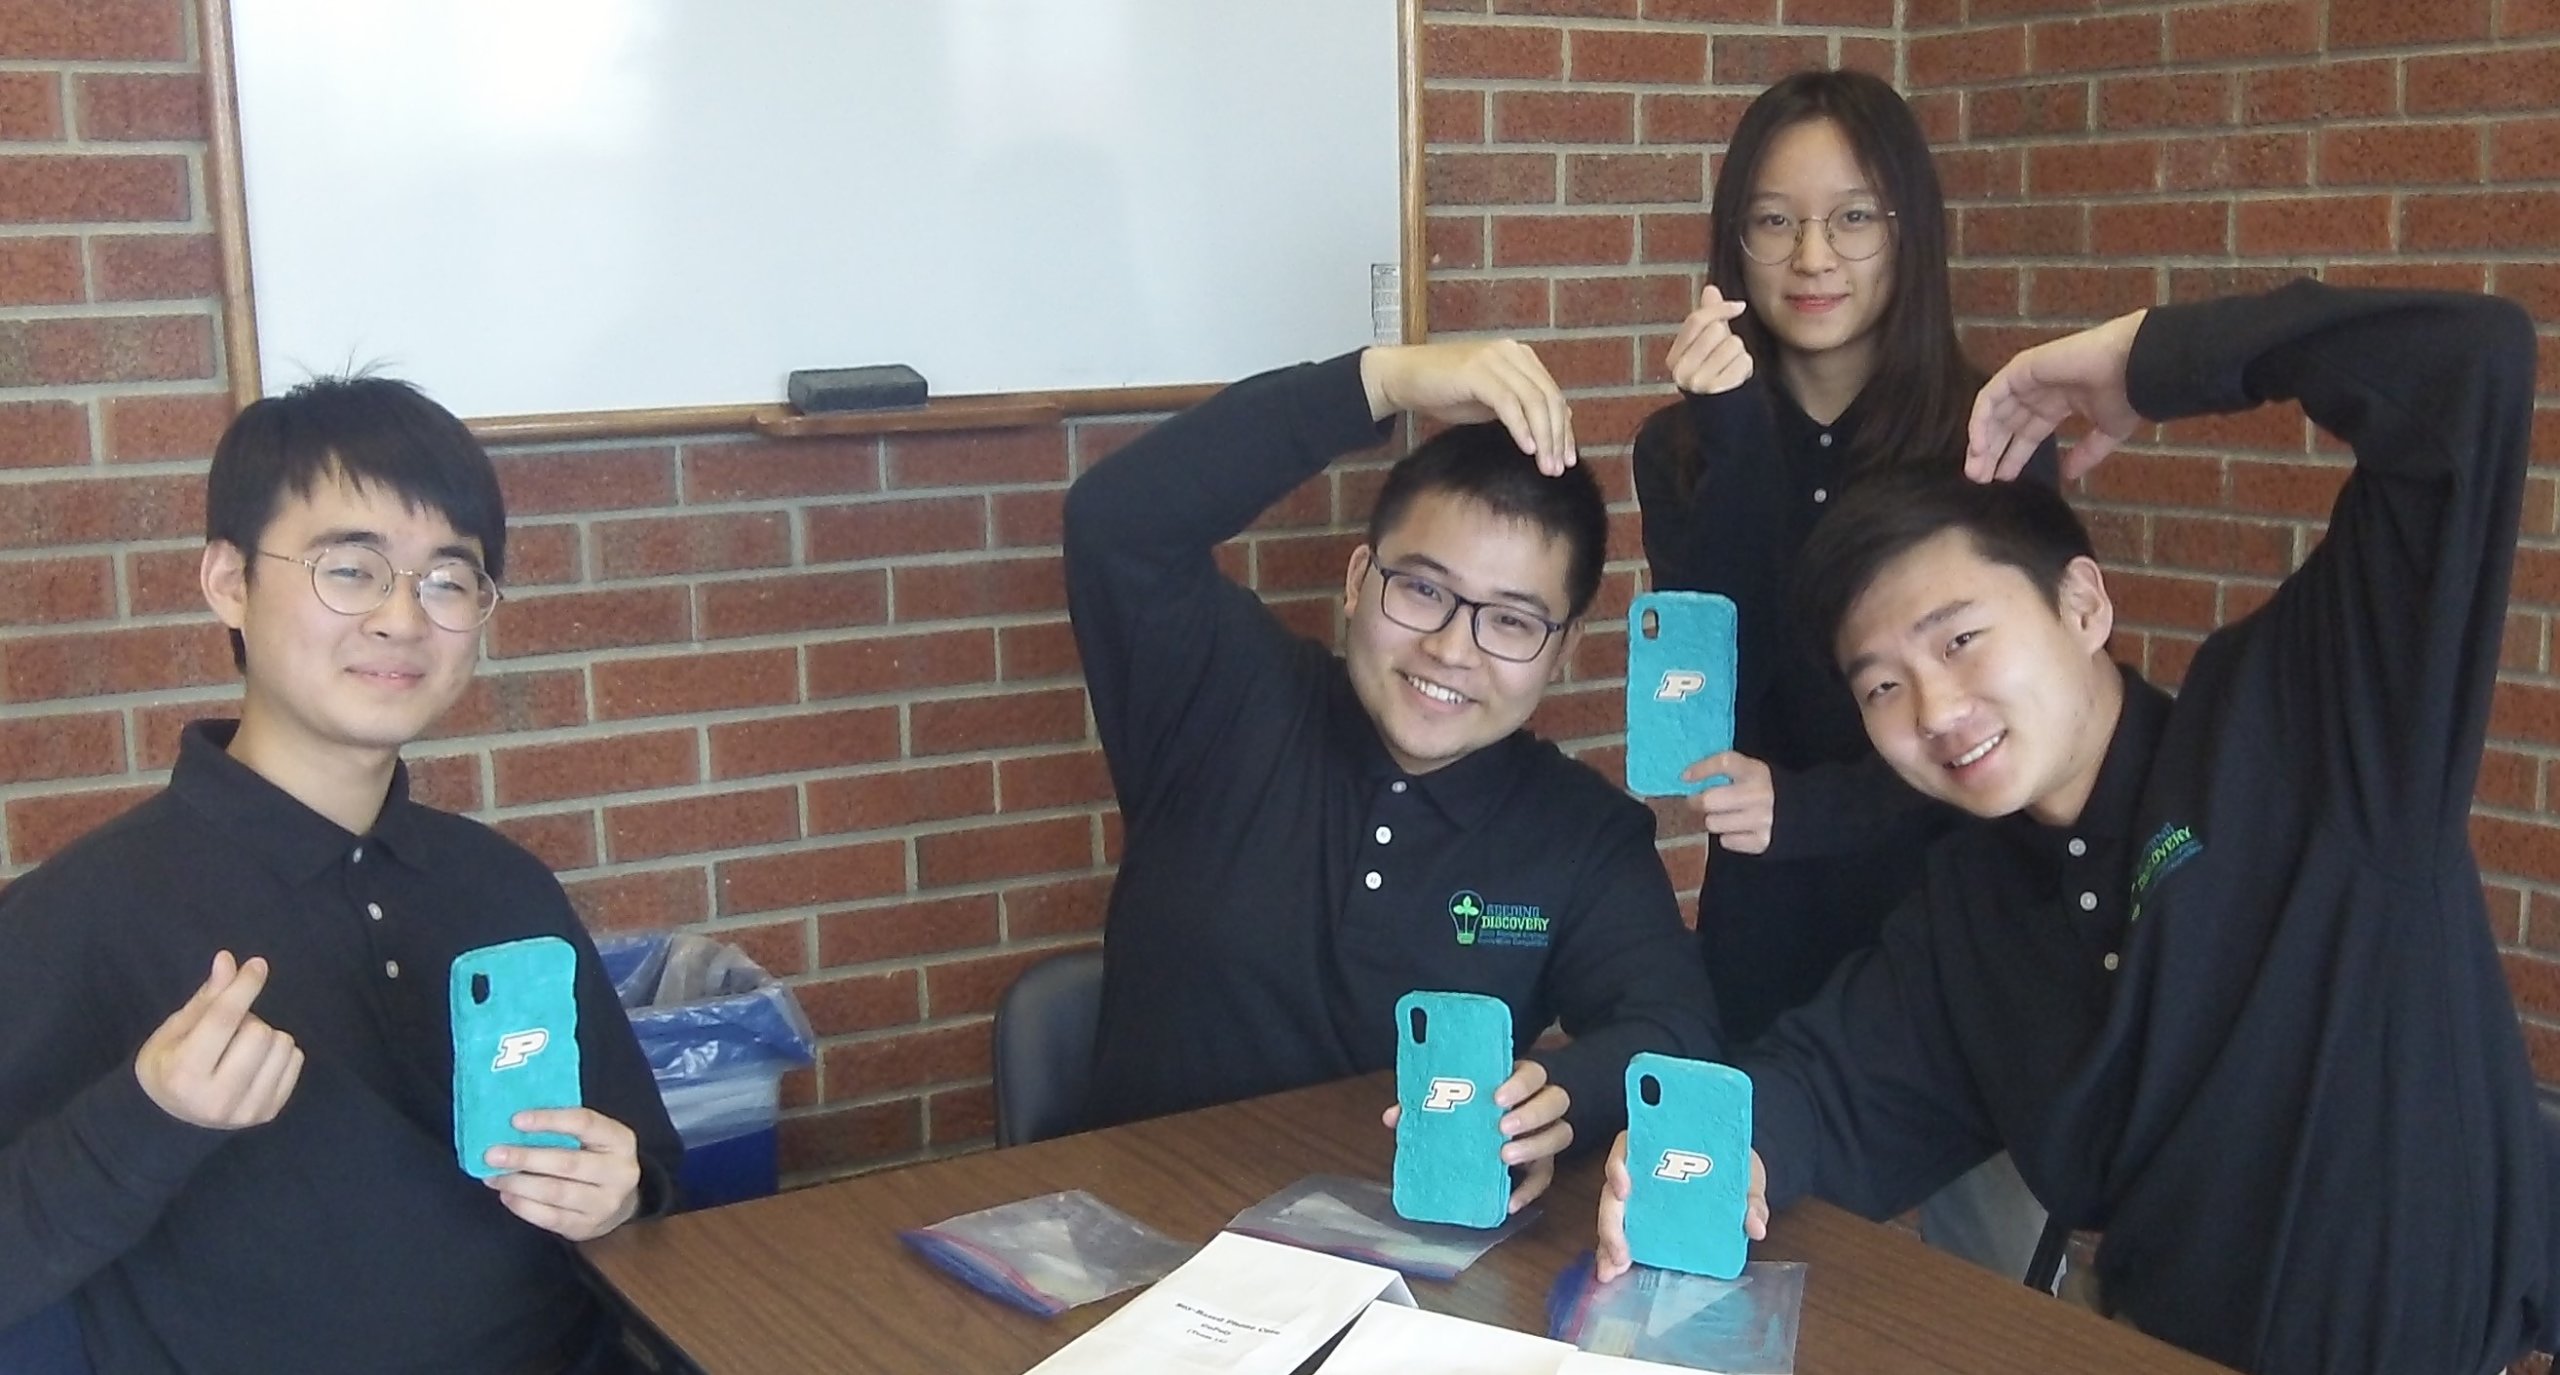 Zifeng Huang, Jingyuan Li, Shuyi Peng and Kunming Shao of Team GoPoly created a soy-based smart phone case that is waterproof and scratch resistant. (Photo by Michelle Creech)